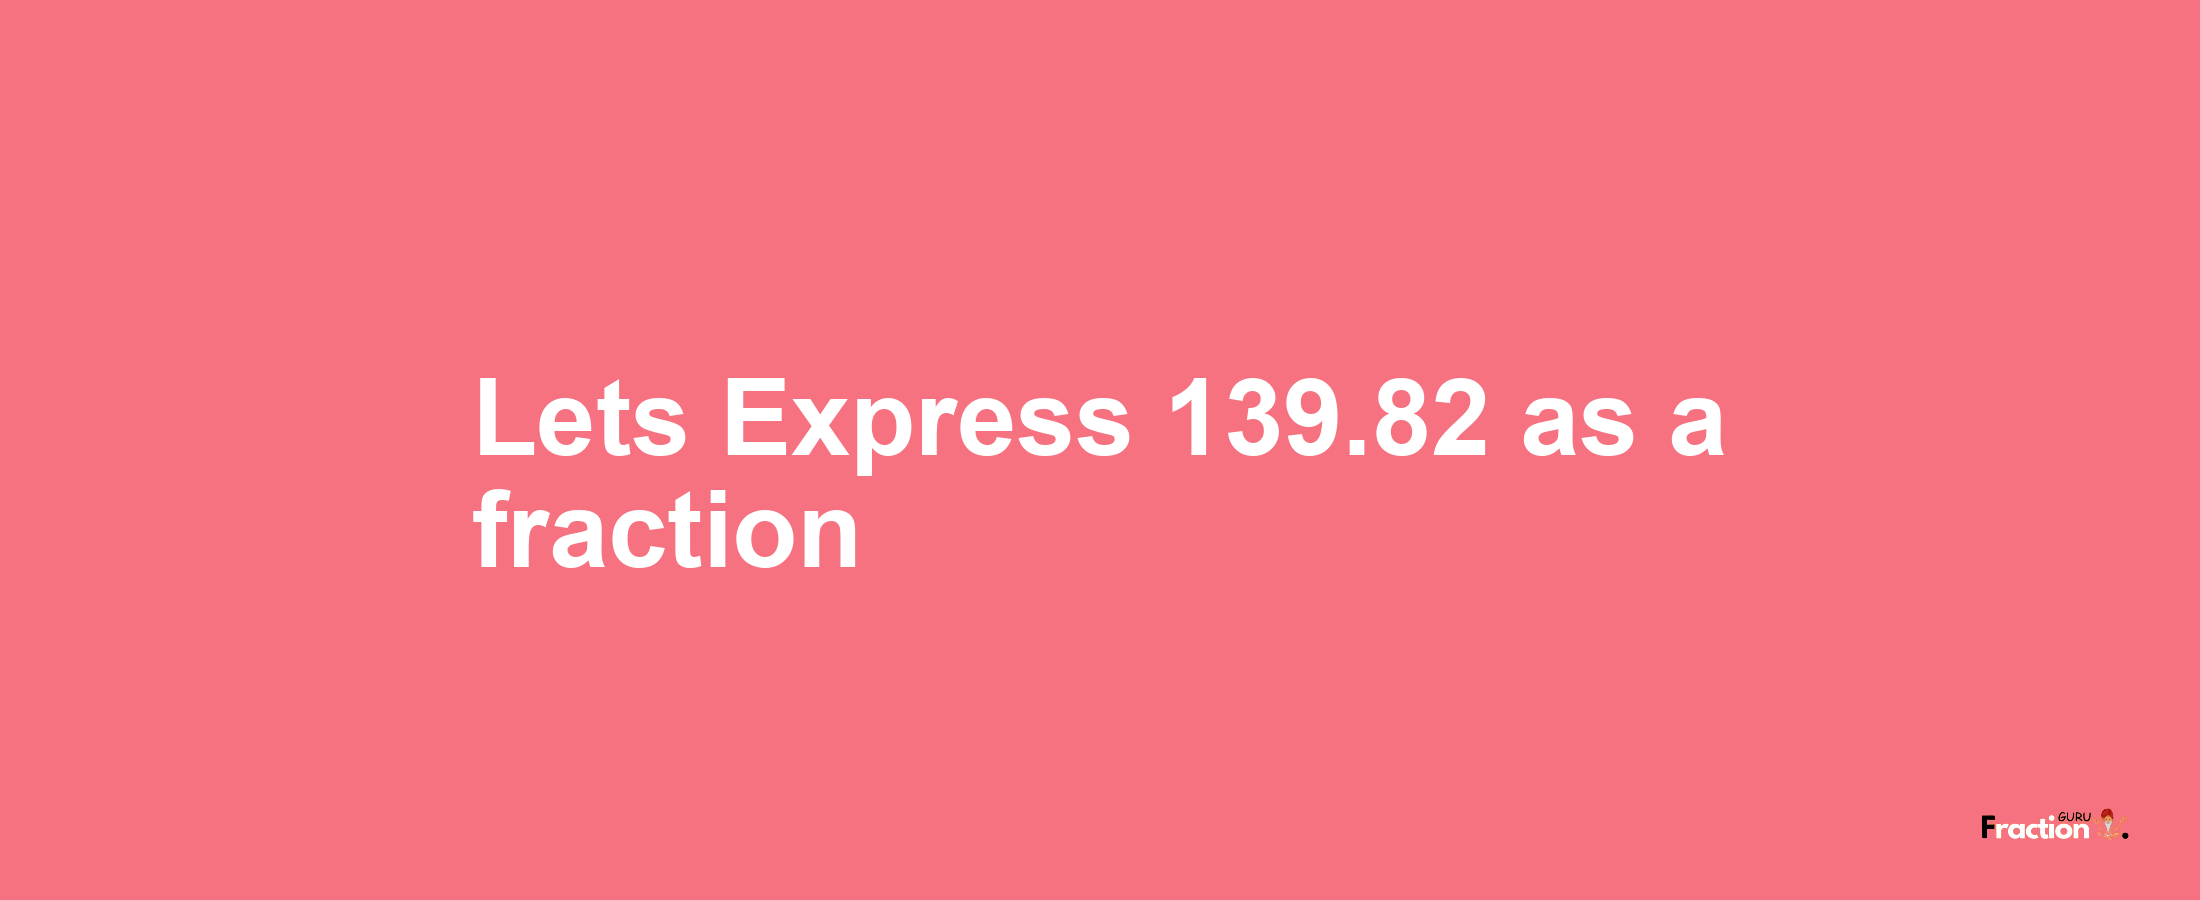 Lets Express 139.82 as afraction